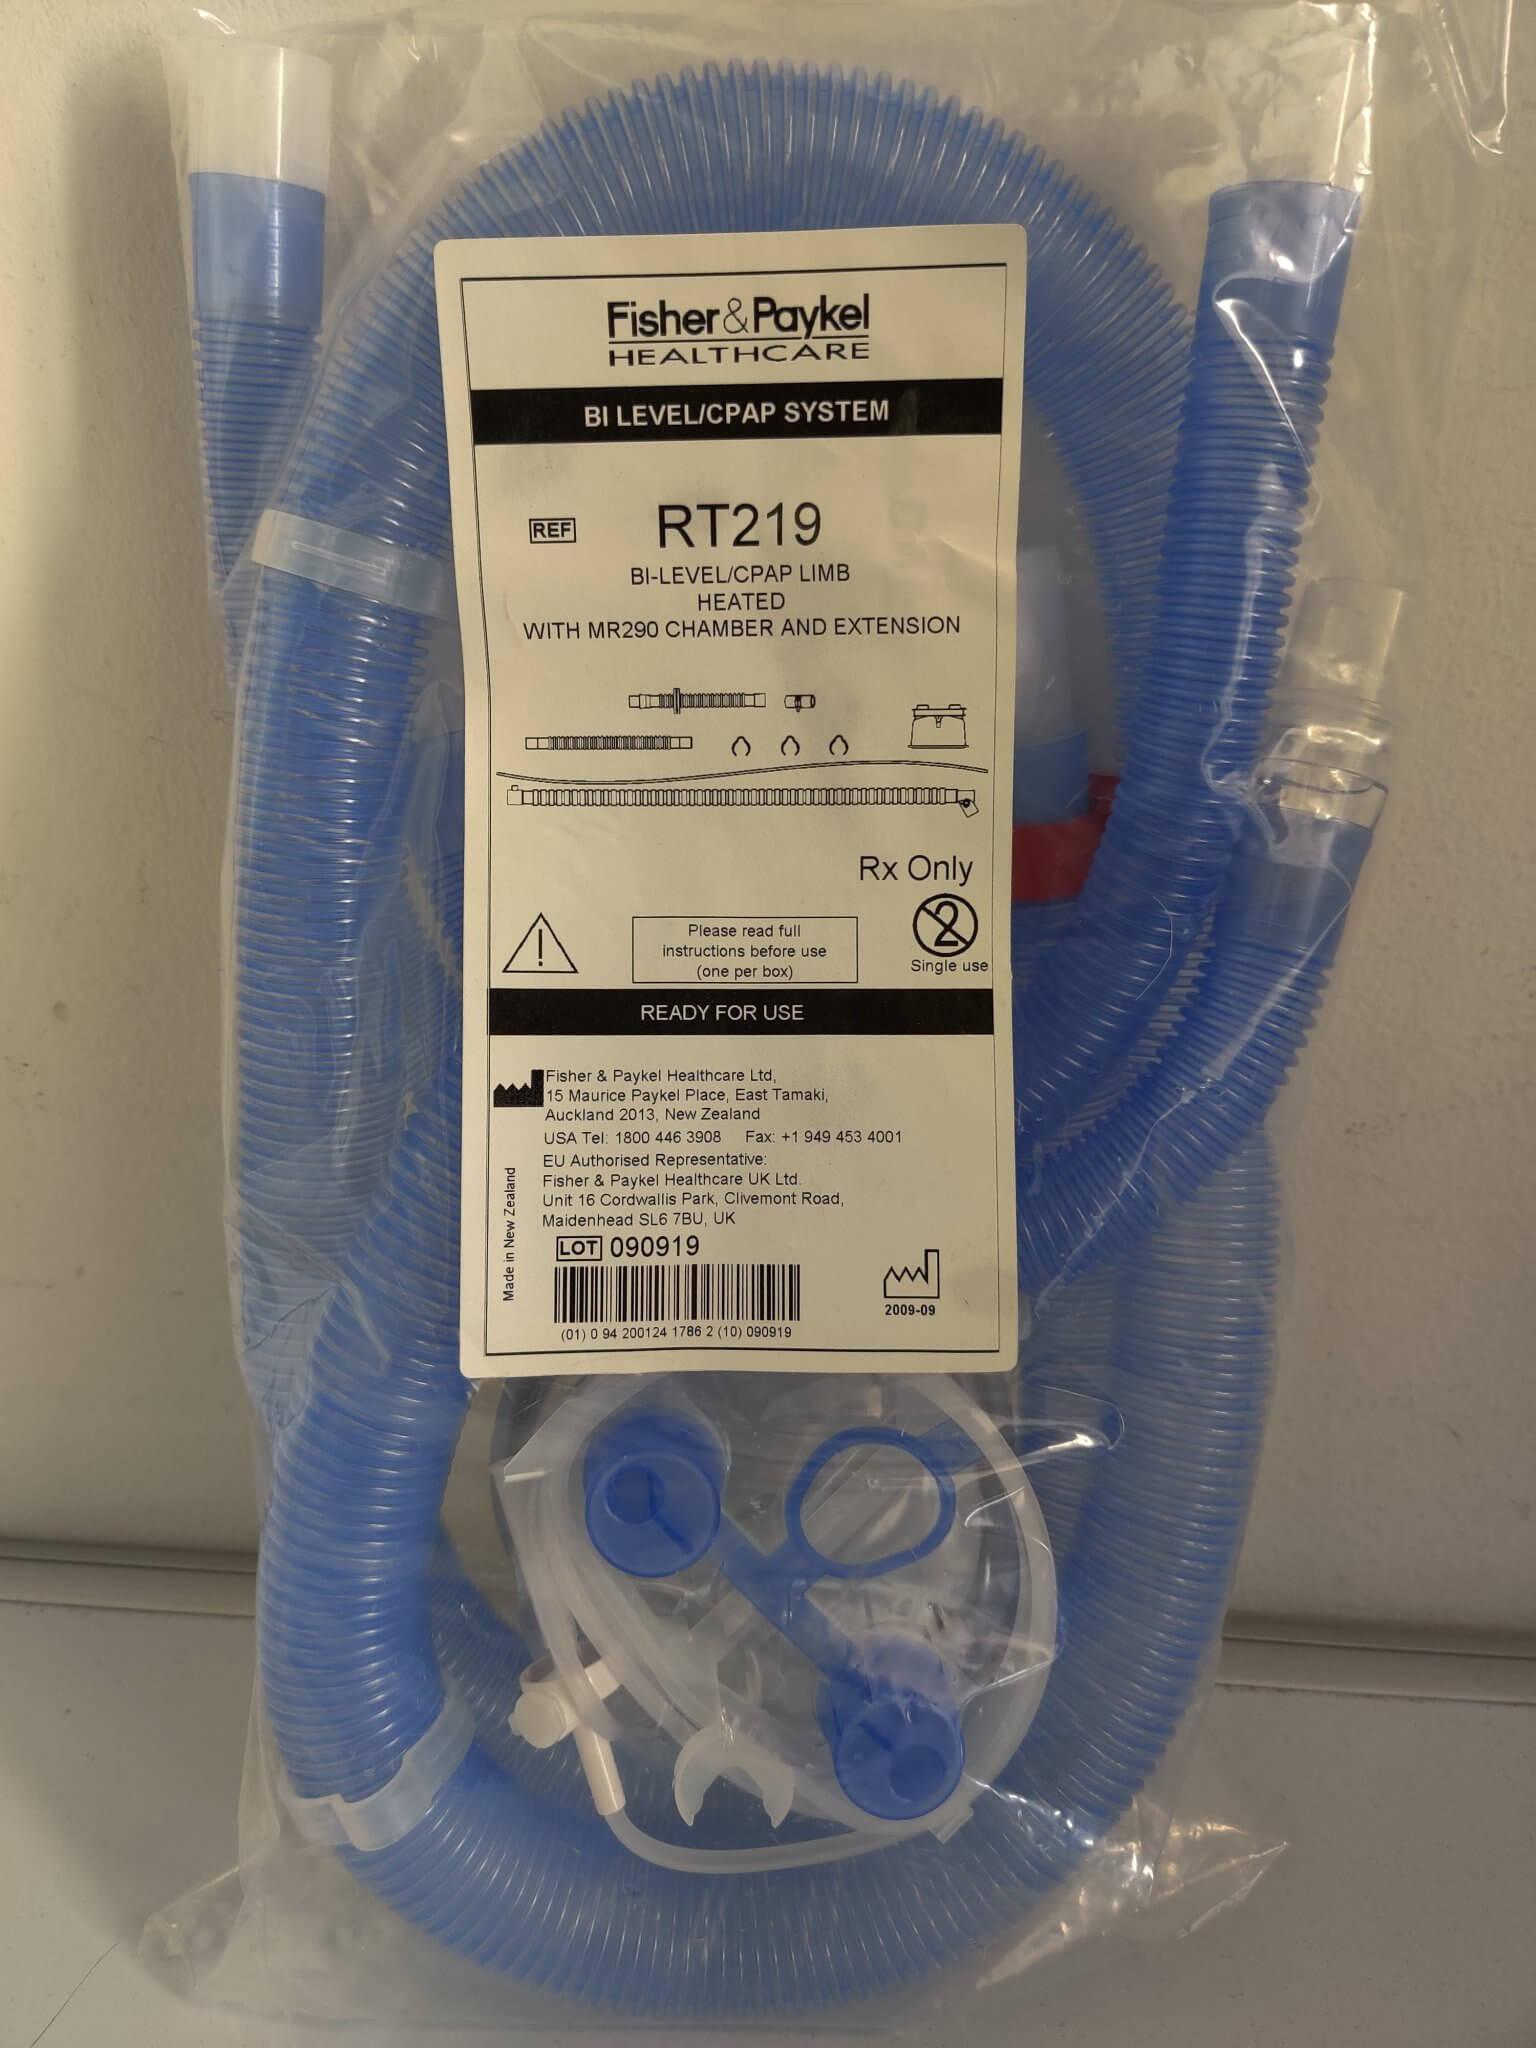 Fisher & Paykel RT219 Adult Breathing Circuit Bi-Level/CPAP Limb Heated With MR290 Chamber & Extension - MBR Medicals